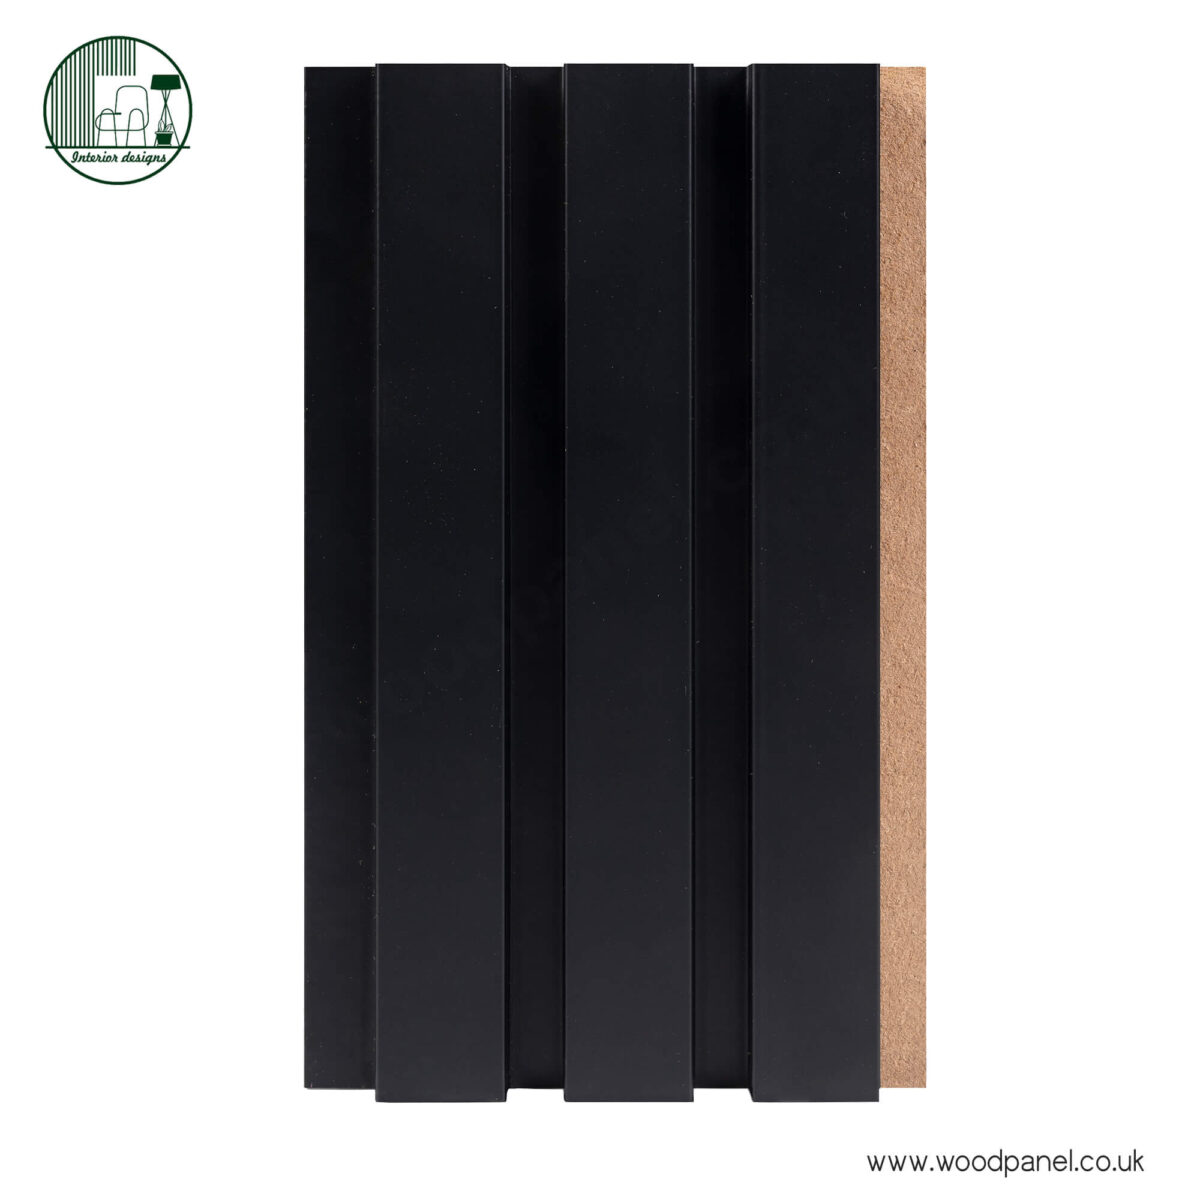 Magnum Opus Wood panel COLLECTION U899 SOFT TOUCH BLACK ST125 2 1 Magnum Opus Wood panel COLLECTION U899 SOFT TOUCH BLACK, ST125